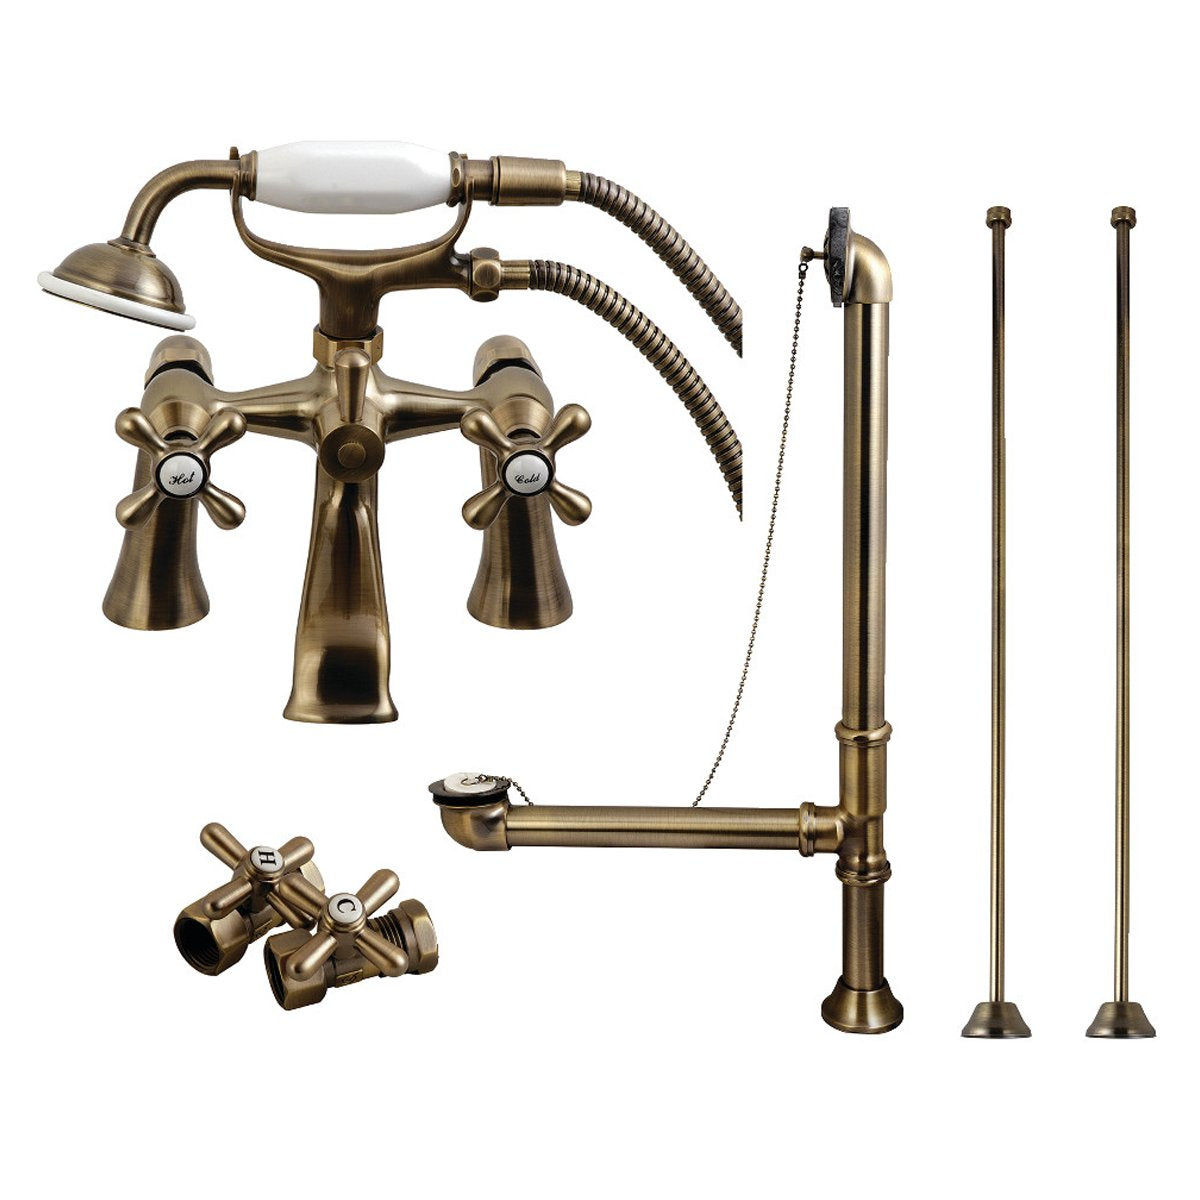 Kingston Brass Vintage Deck Mount Clawfoot Tub Faucet Package